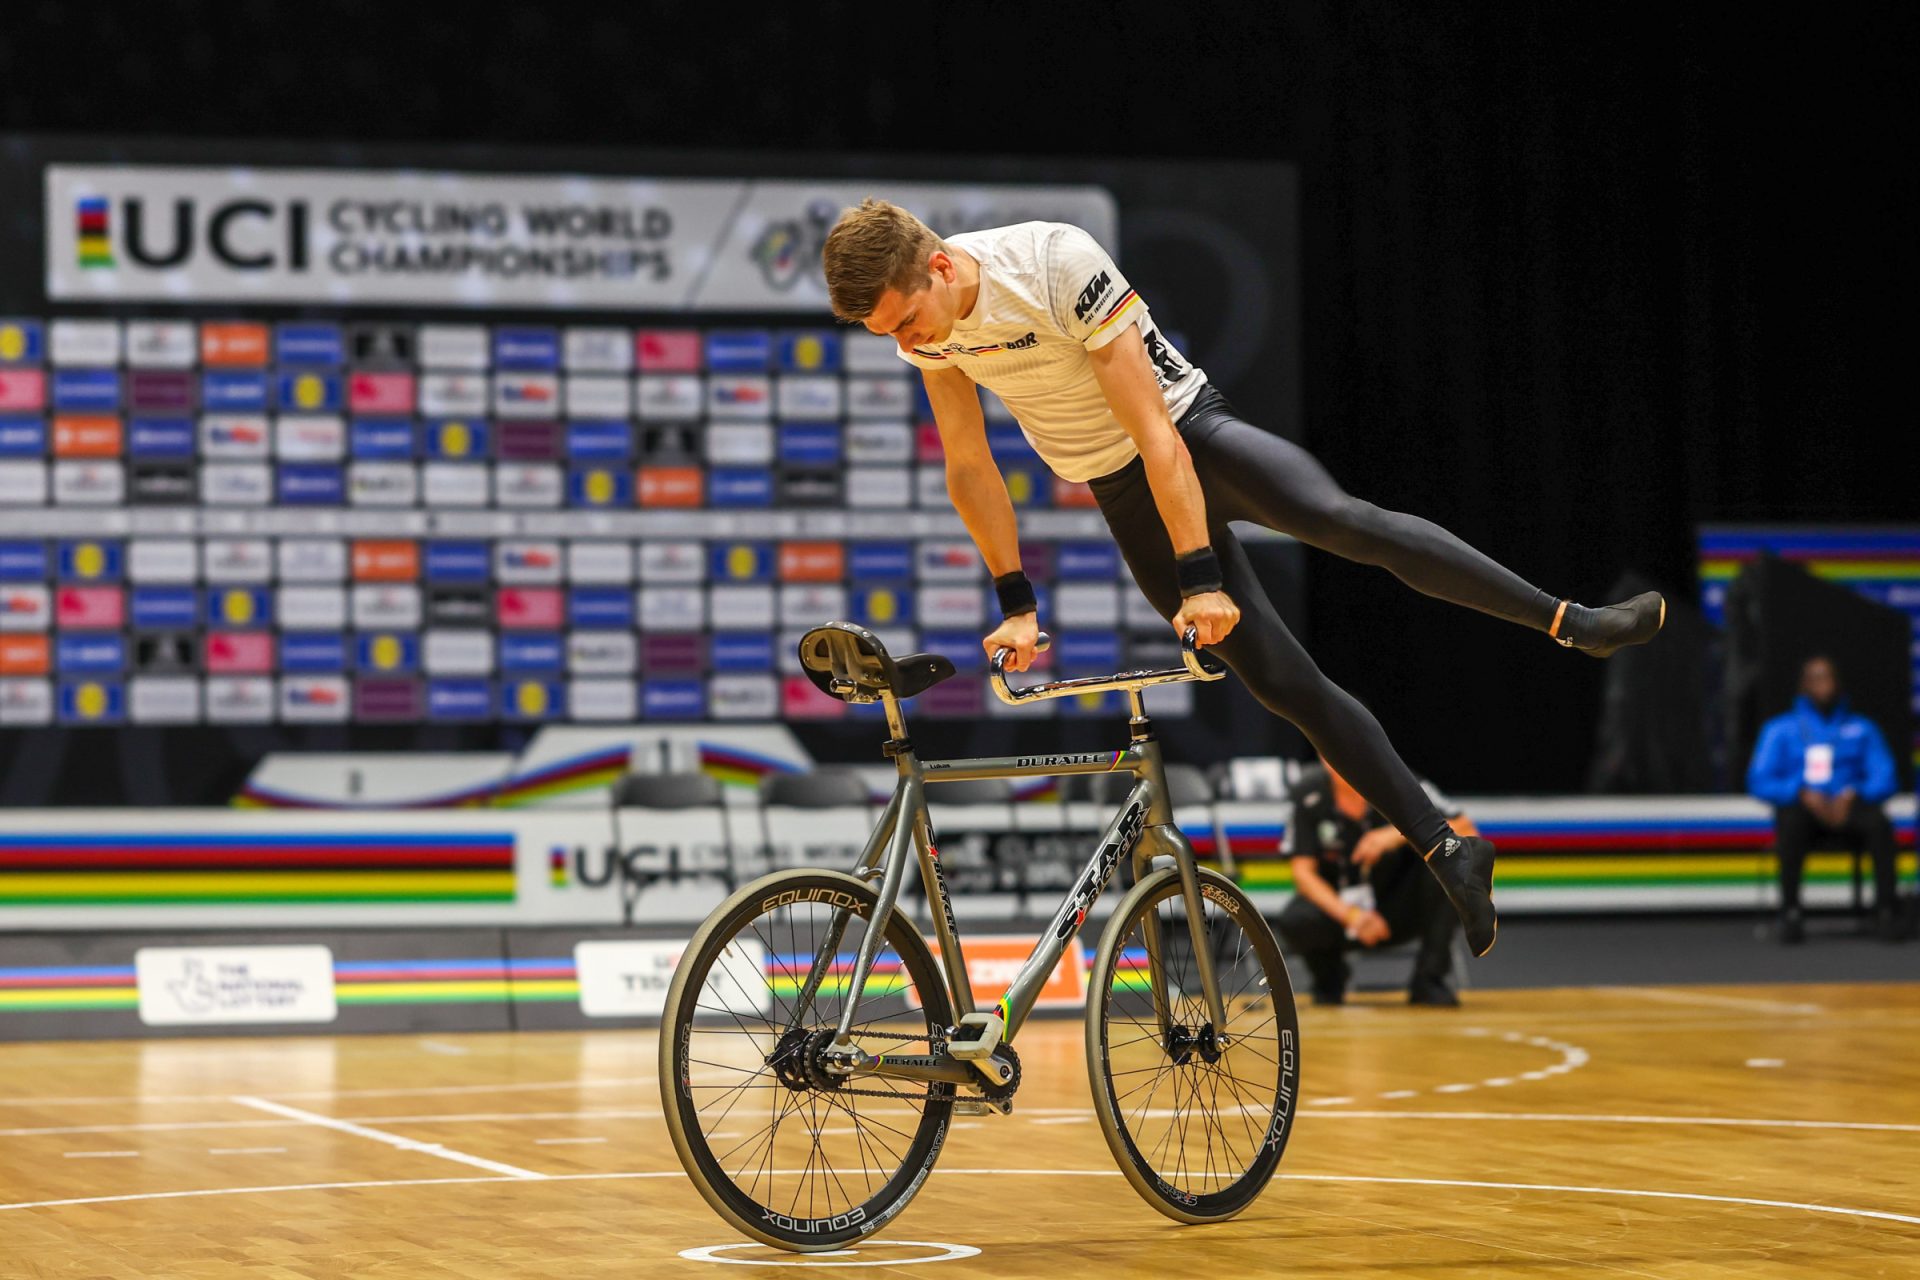 A German artistic cyclist in the men's final riding backwards, balancing himself on the handlebars.